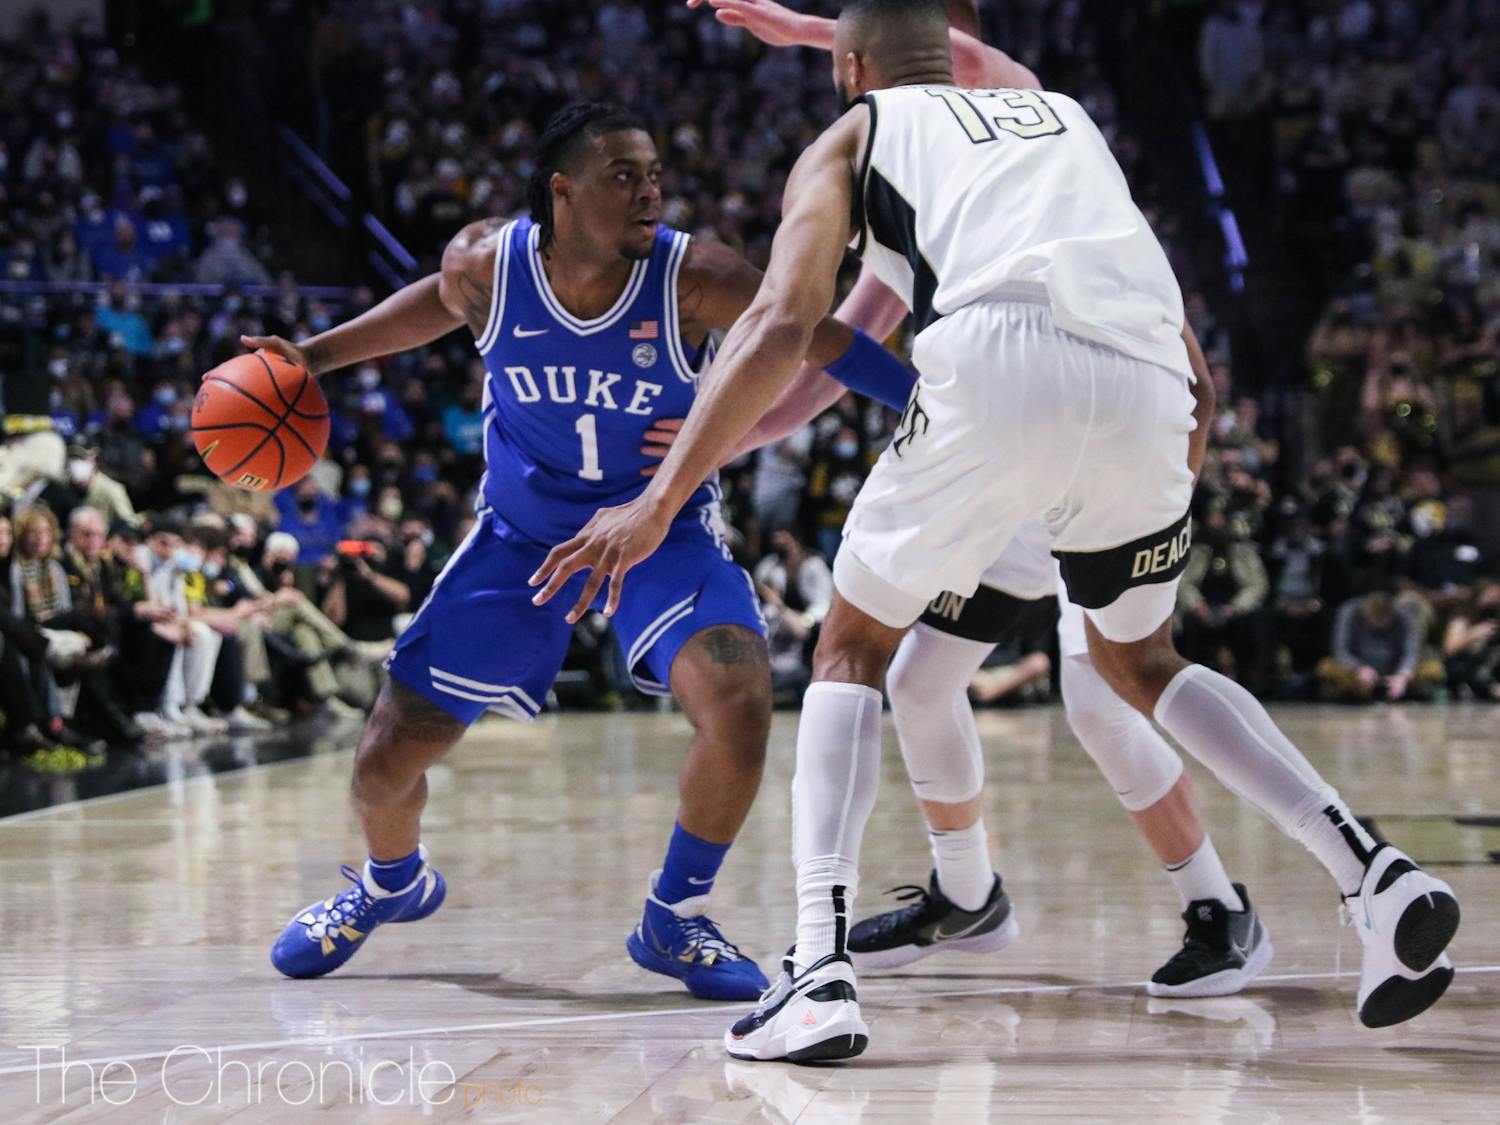 Trevor Keels was the third leading scorer for the Blue Devils against Wake Forest, as the top three scorers from Duke combined for 75% of the Blue Devils' final point total.